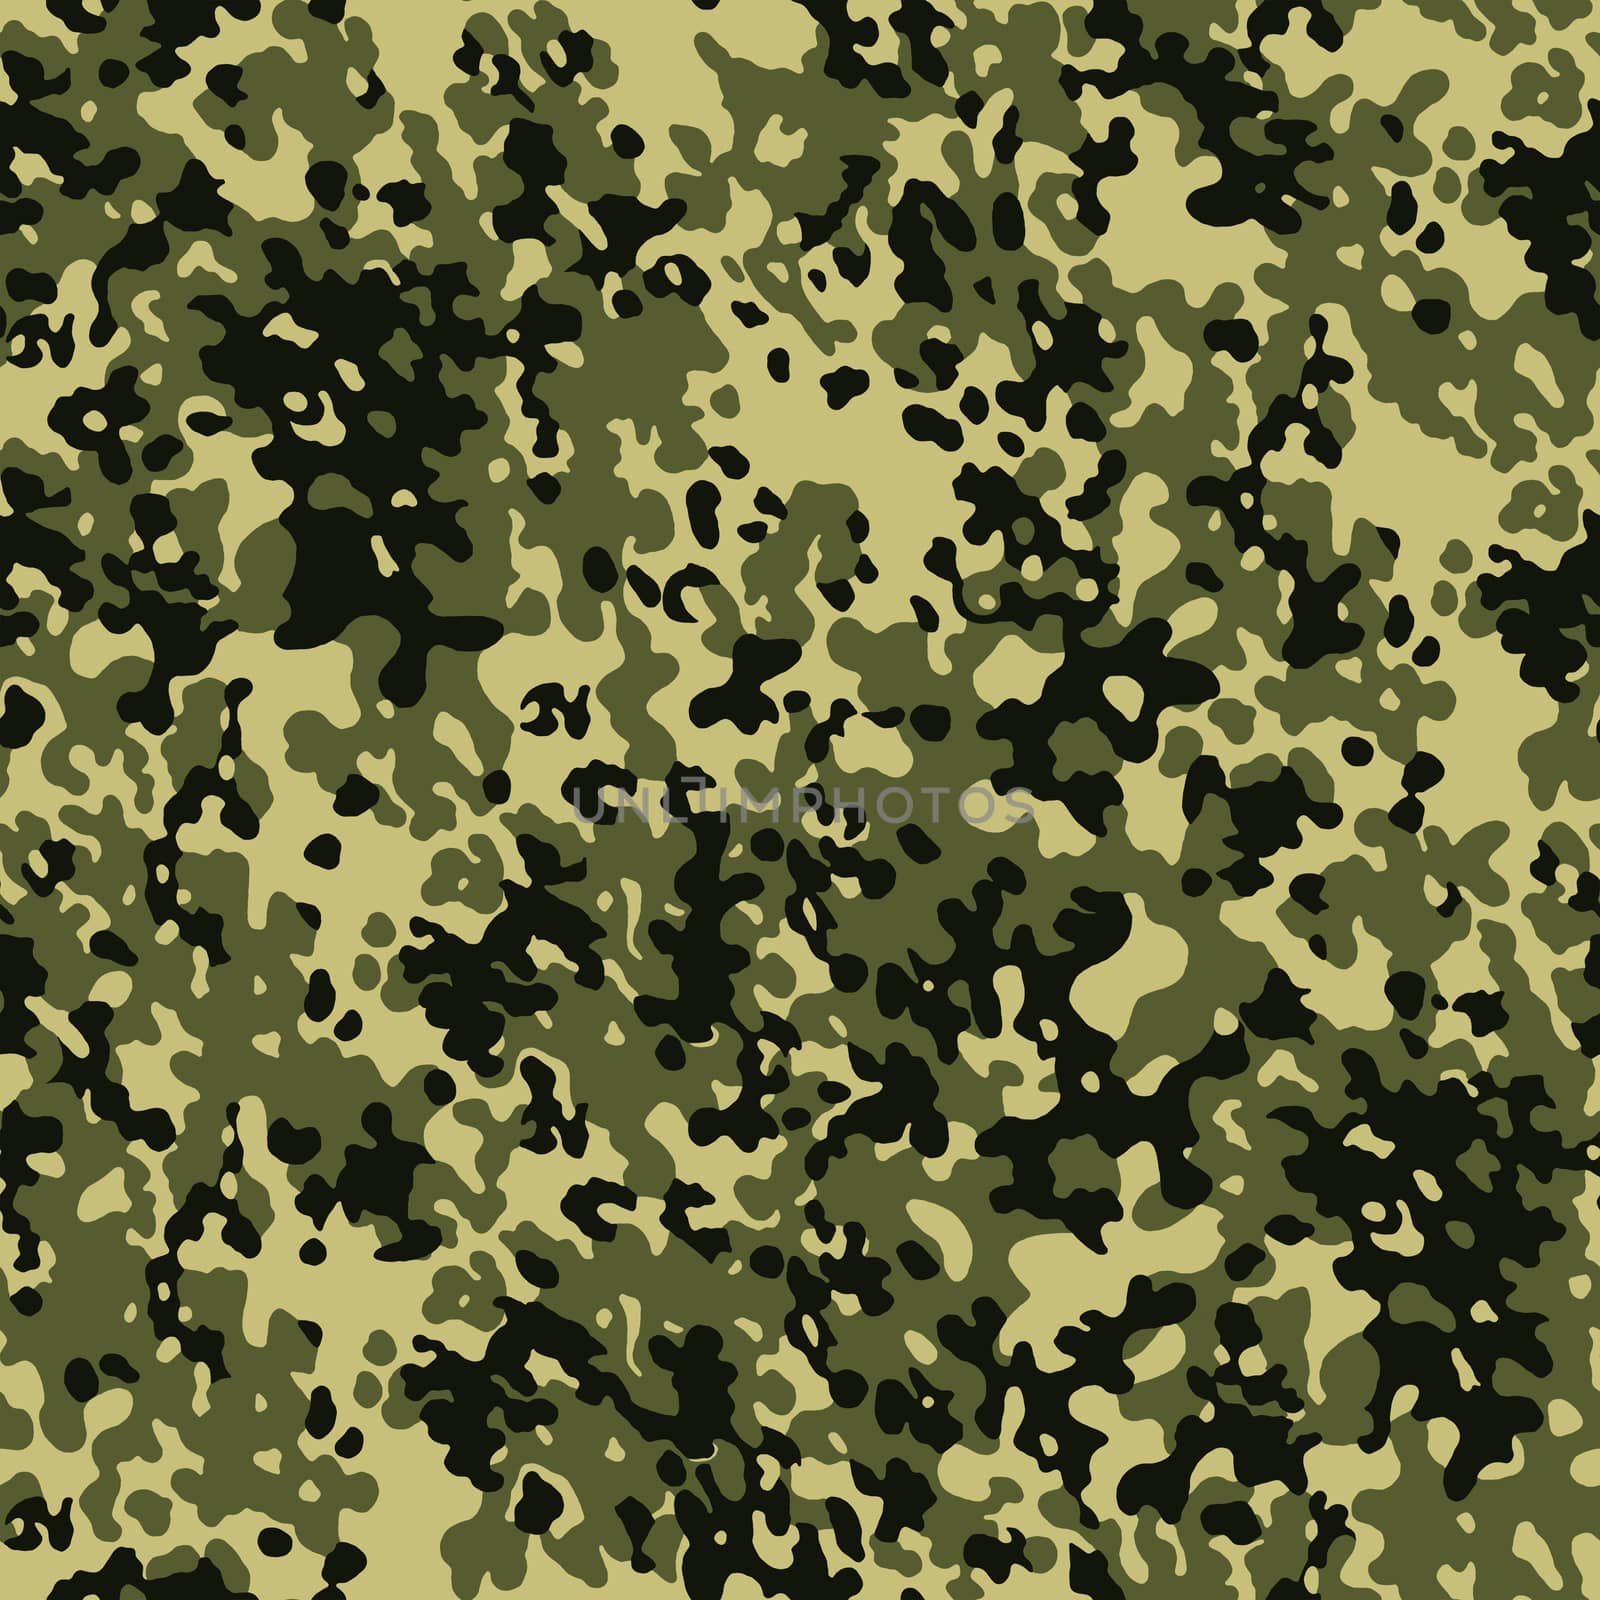 Camouflage pattern pattern of military uniforms.Texture or background